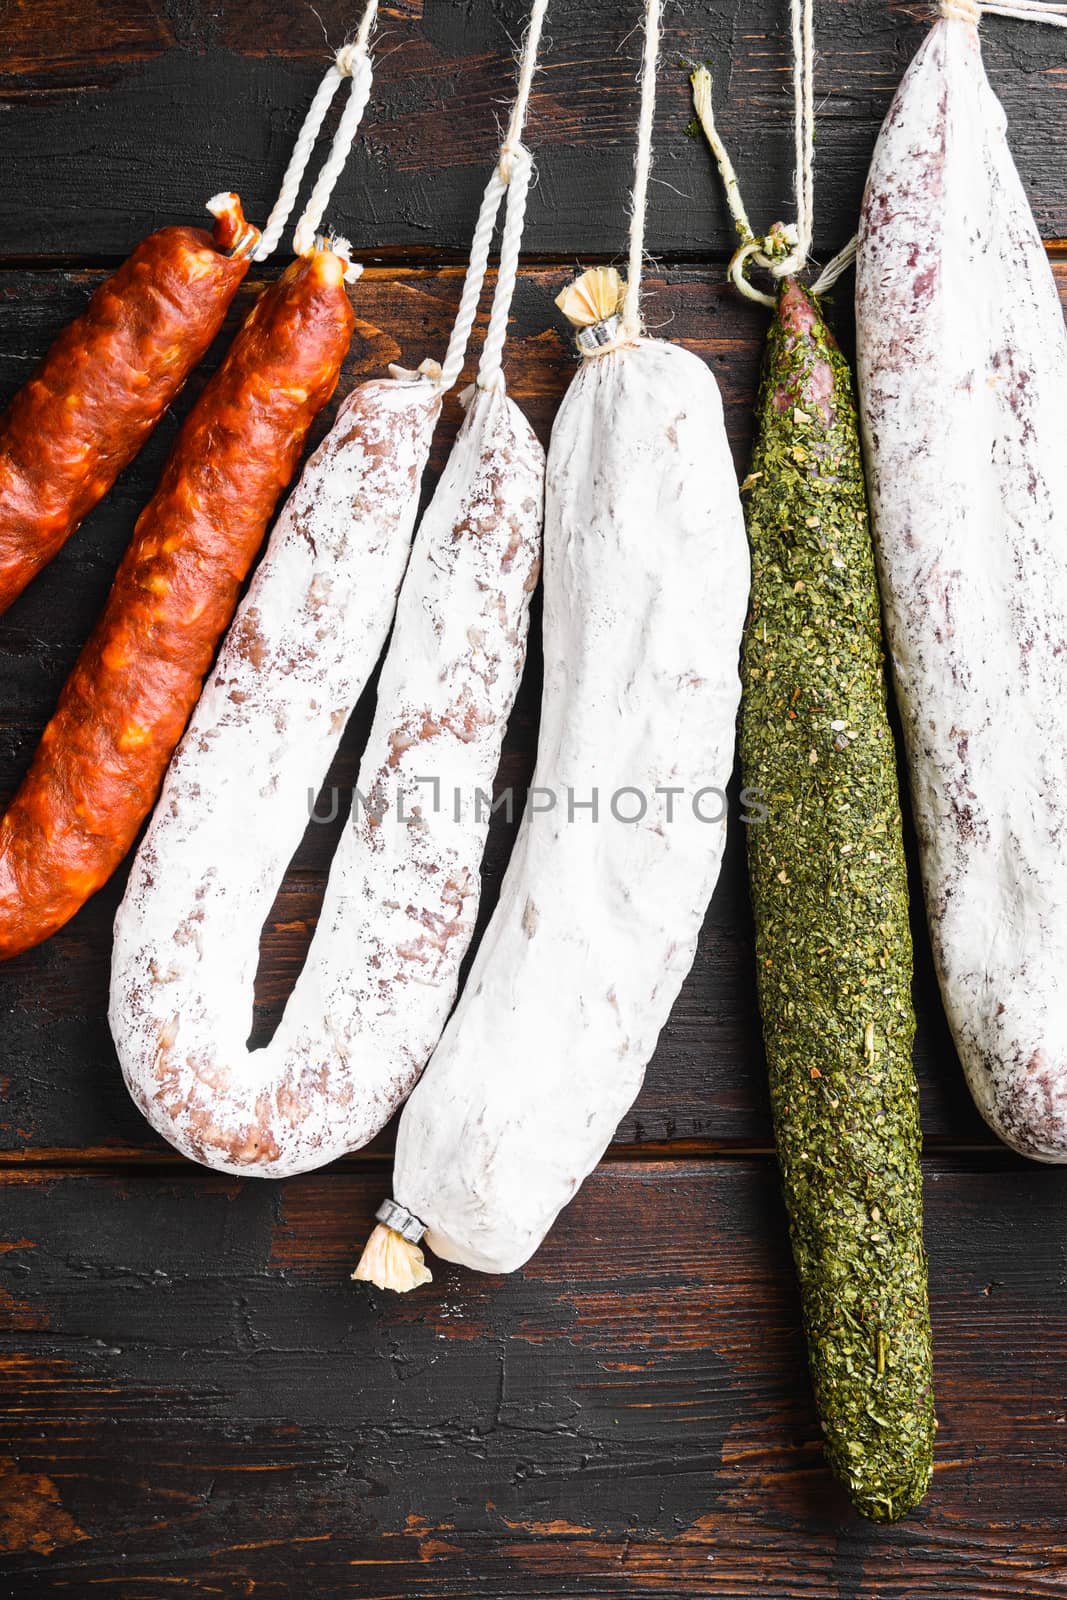 Dry cured spanish meat sausages hanging on old wooden table, topview.